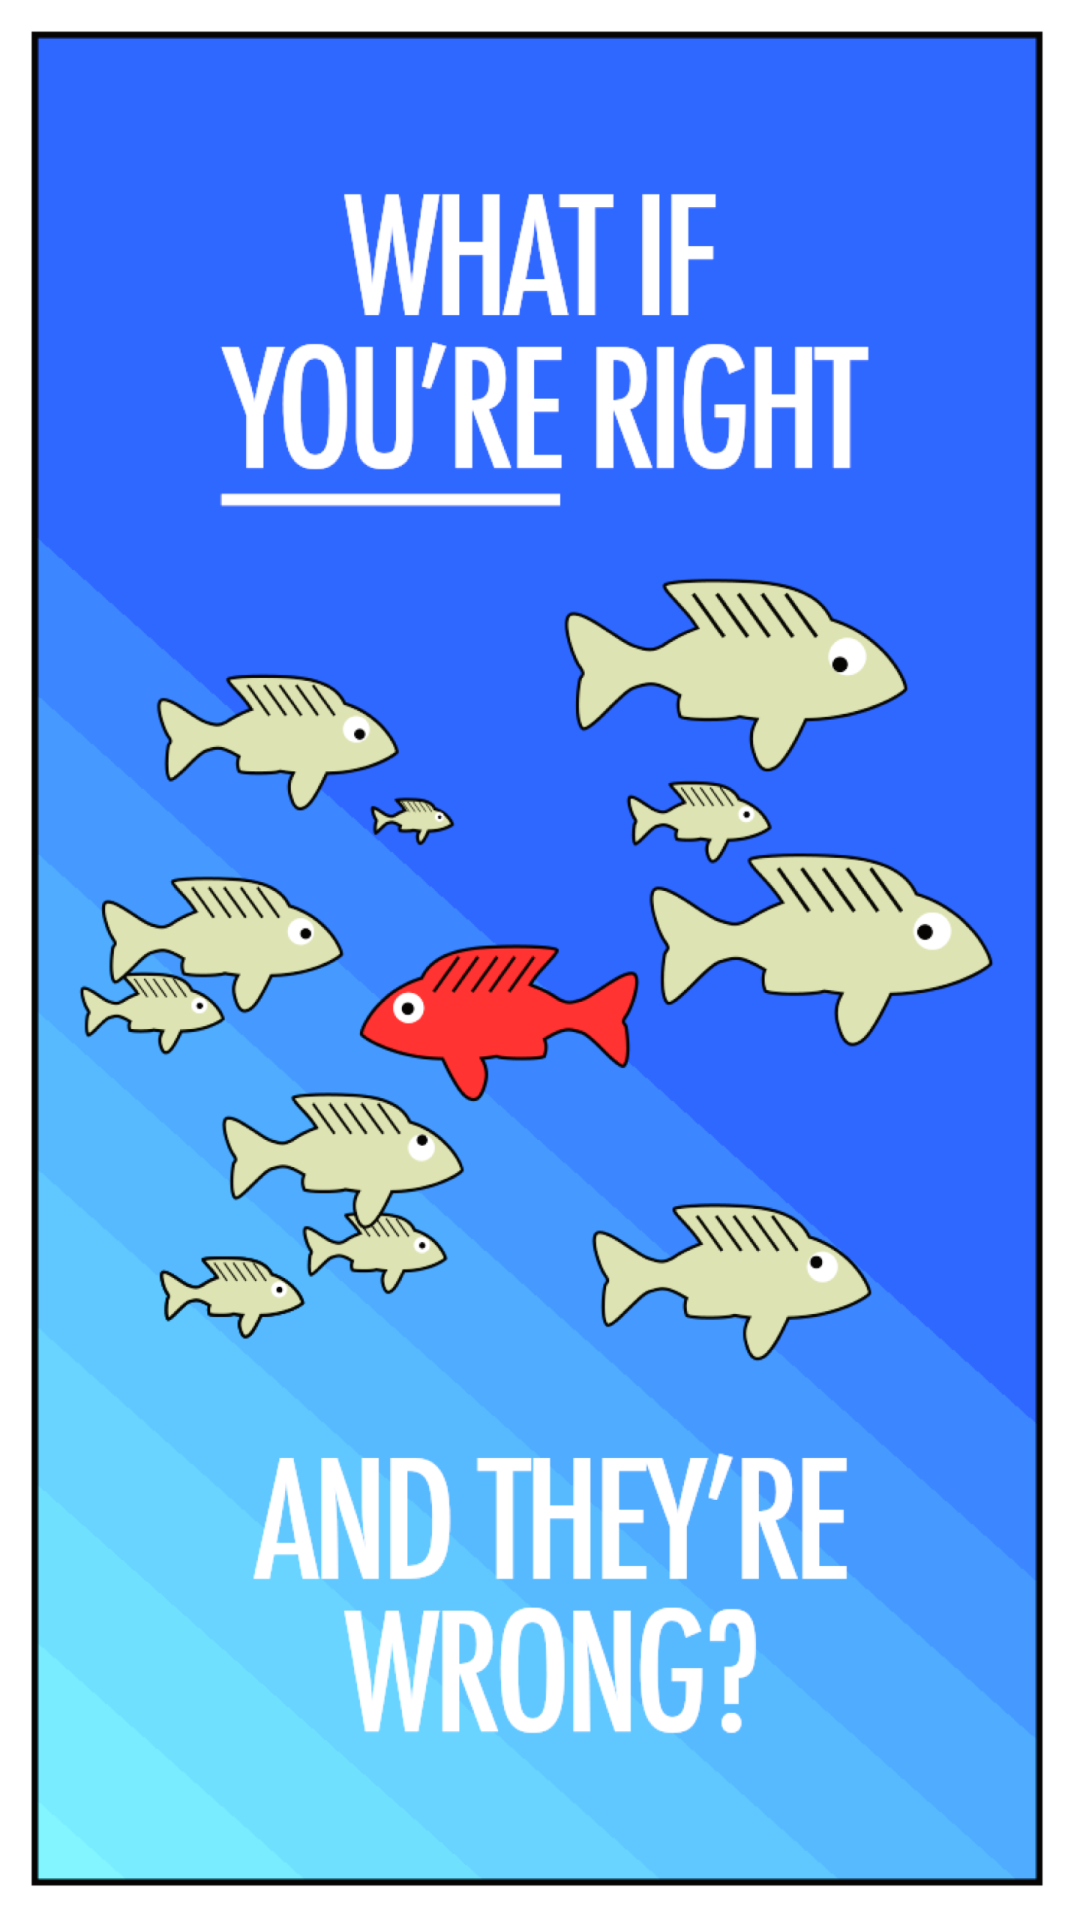 Remade The Fargo Fish Poster Real Quick With Proper Fish